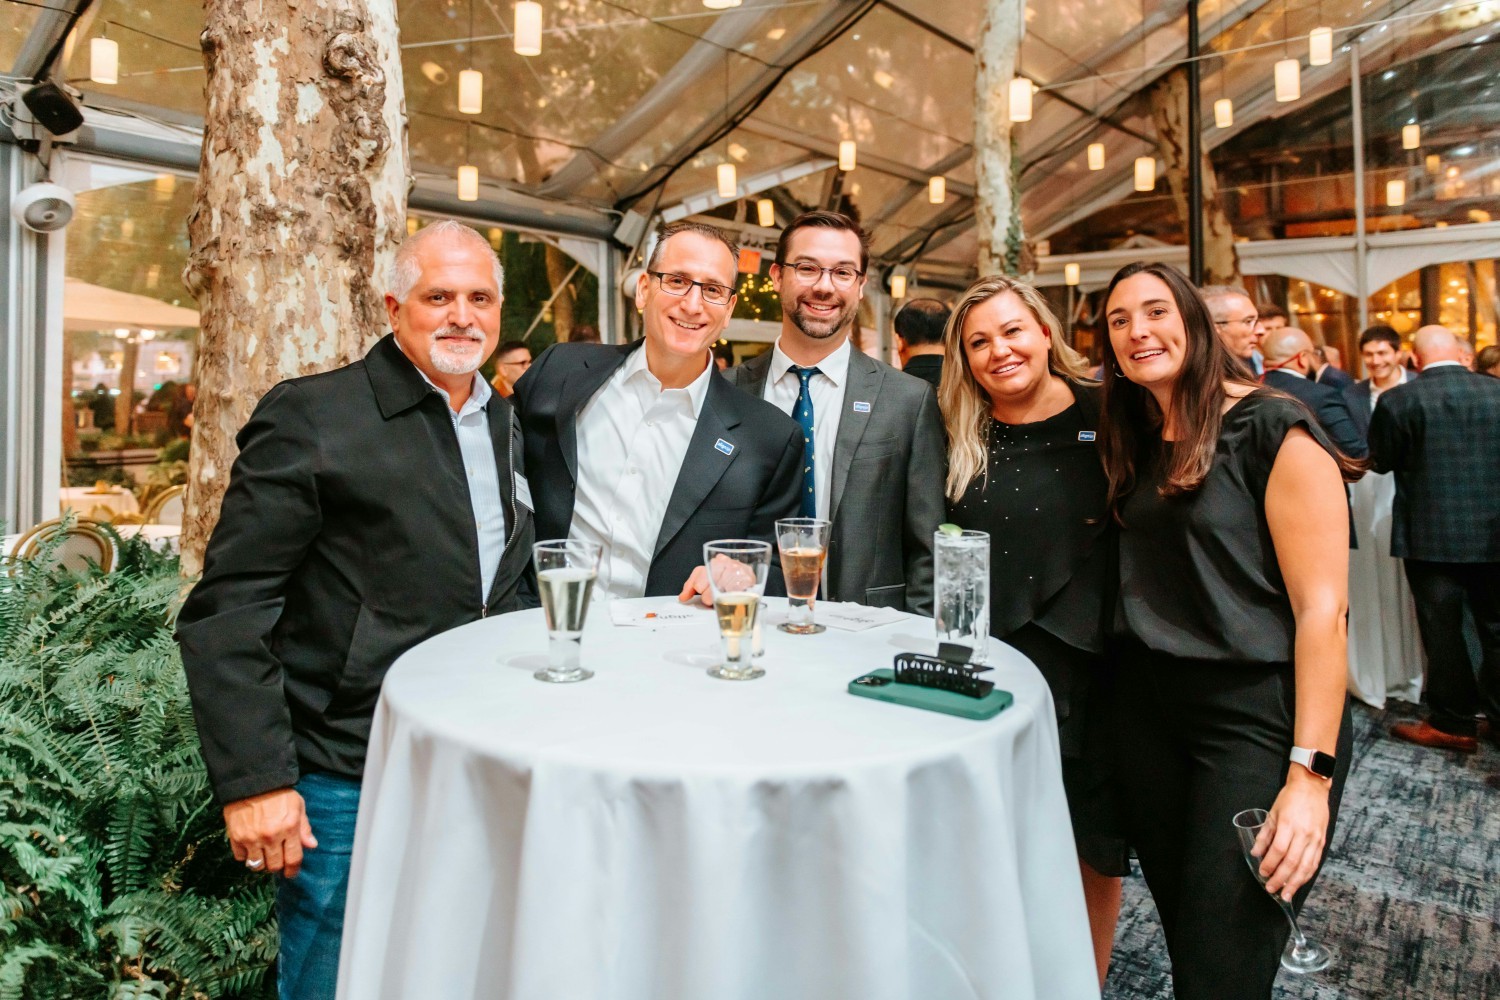 To celebrate 36 years of business, we threw an anniversary party at Bryant Park Grill in New York City.